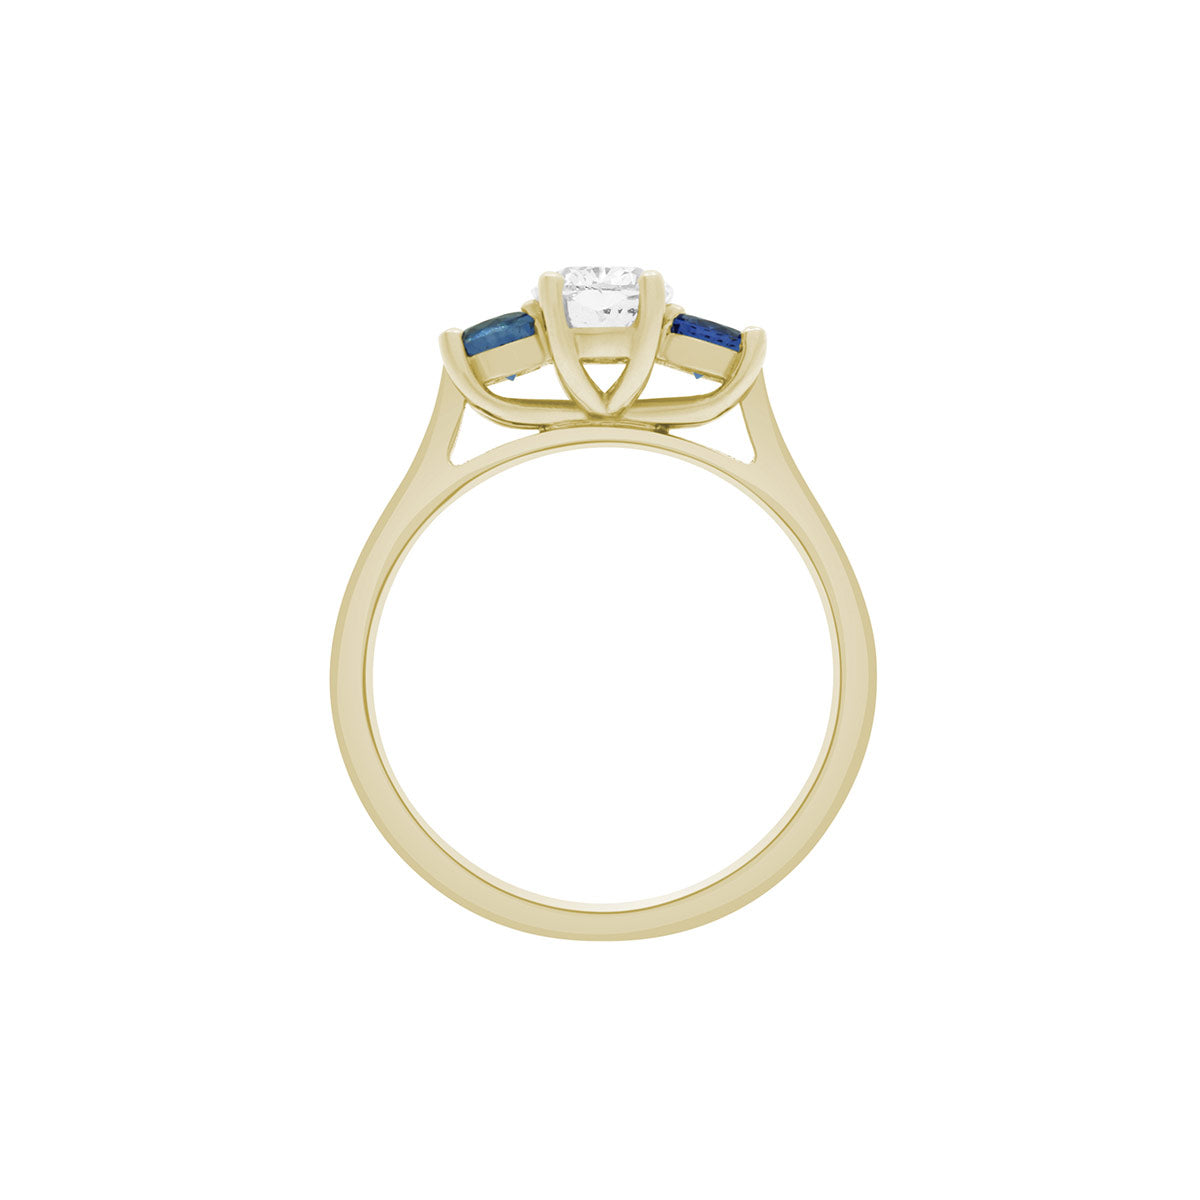 Diamond Sapphire Trilogy set in yellow gold metal in an upright position